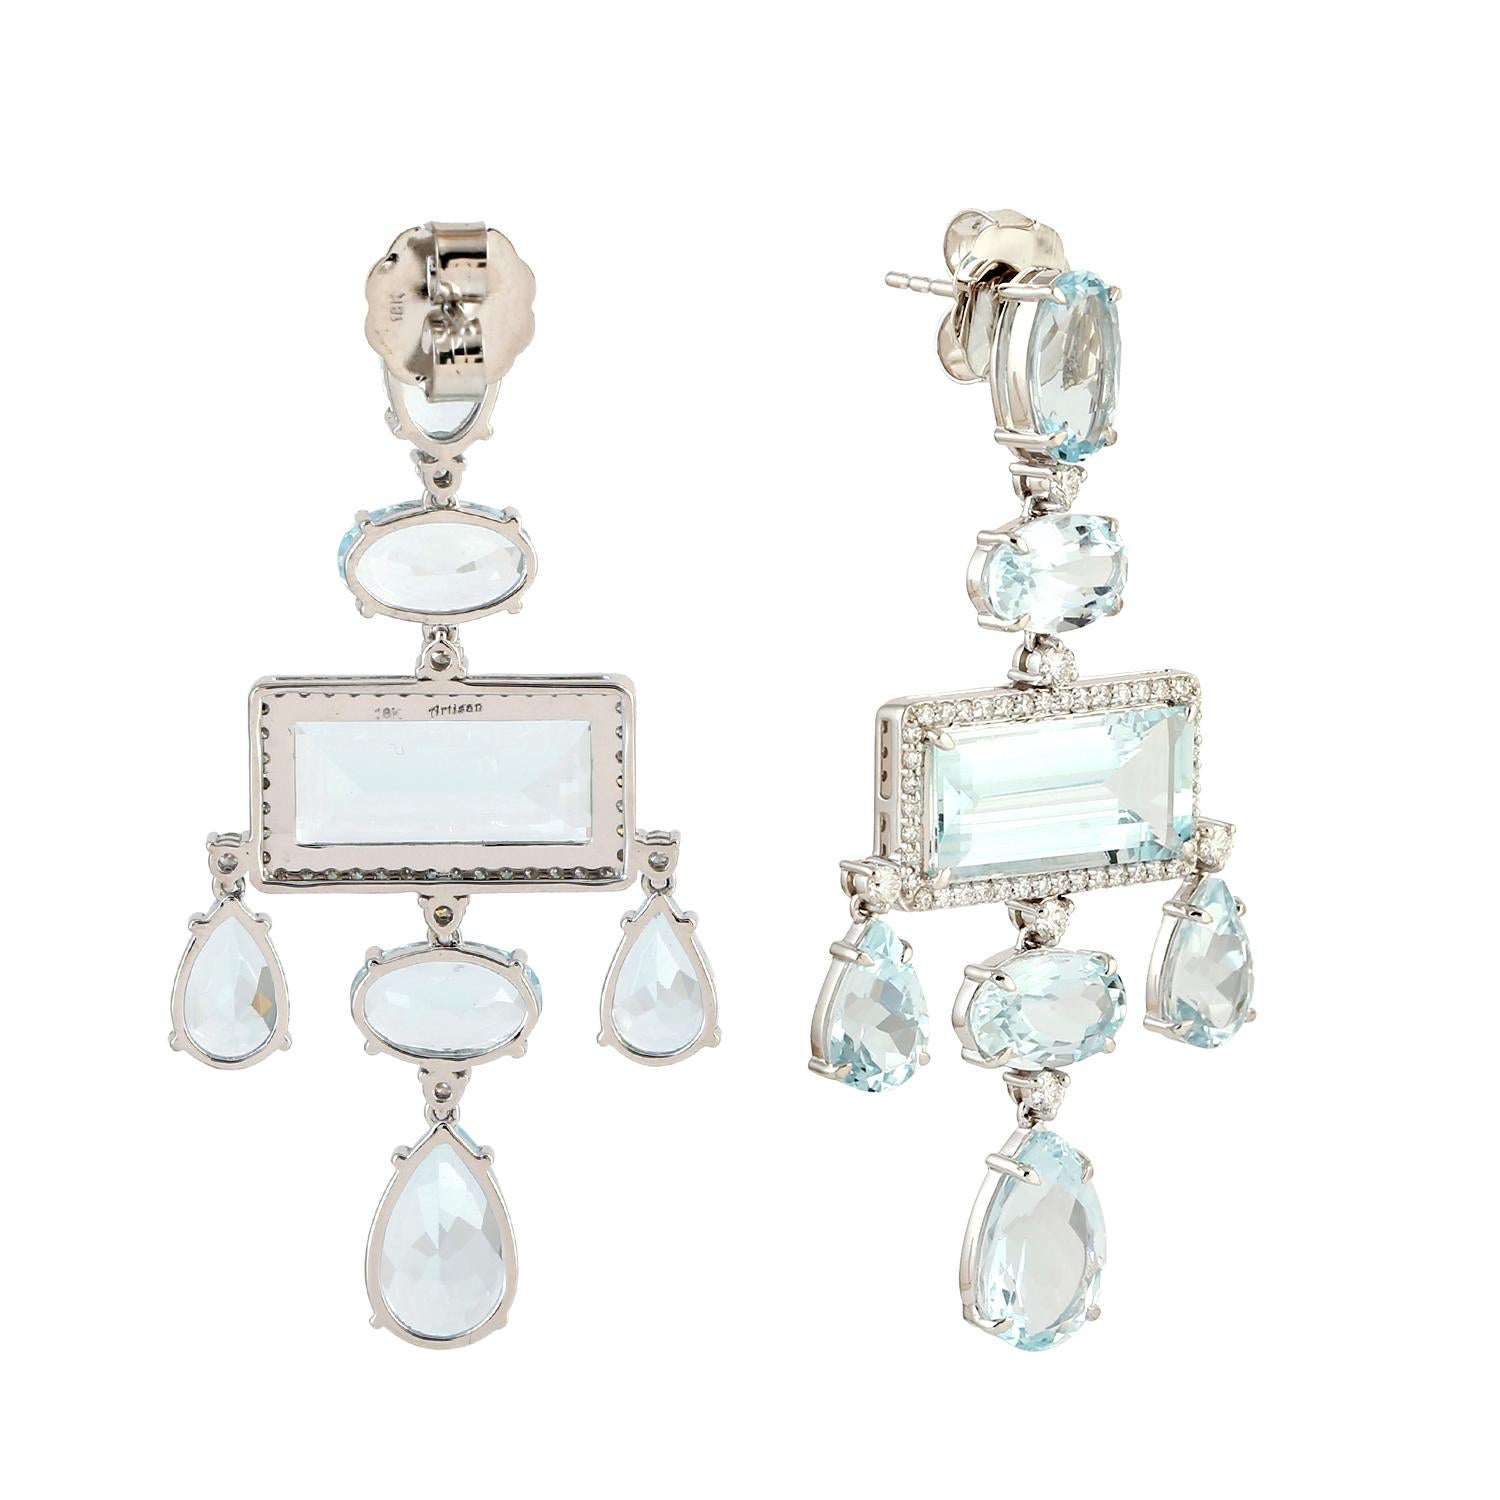 Art Deco Aquamarine Chandelier Earrings With Diamonds made In 18k White Gold For Sale